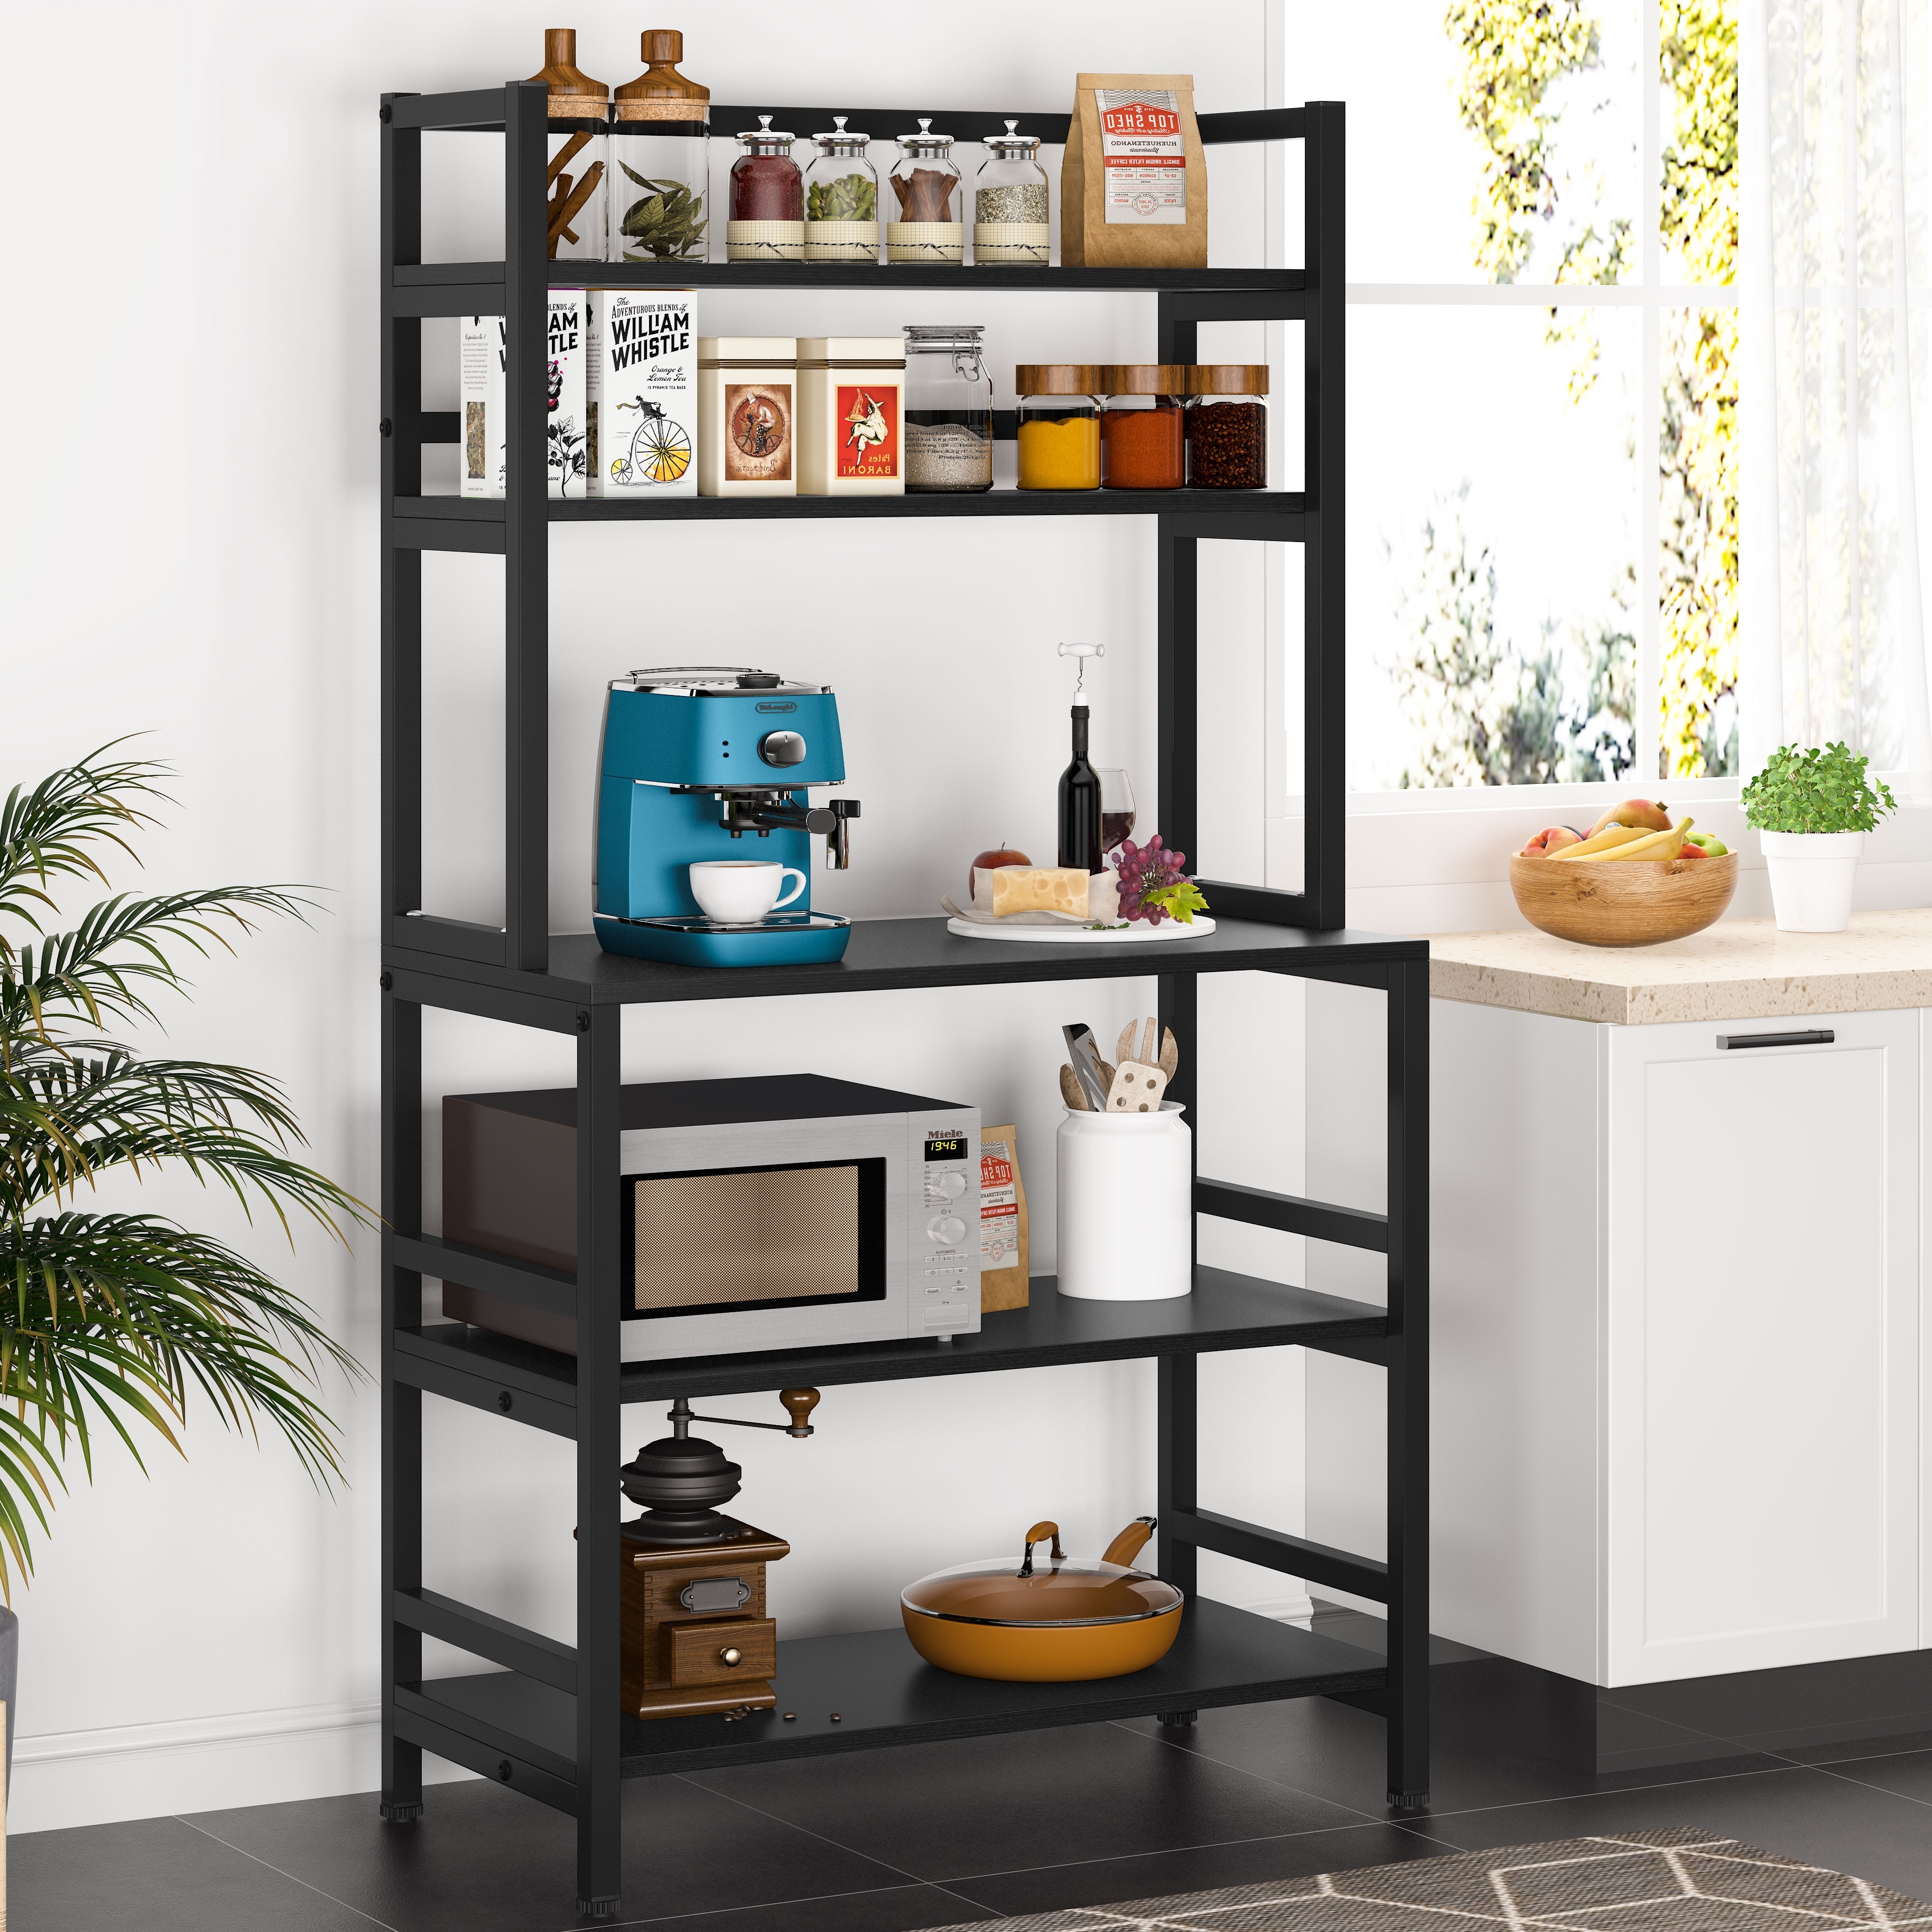 https://ak1.ostkcdn.com/images/products/is/images/direct/a08087af1607fea06a58e68f6093dc04ef59ac46/5-Tier-Kitchen-Bakers-Rack-with-Hutch-Organizer-Rack.jpg